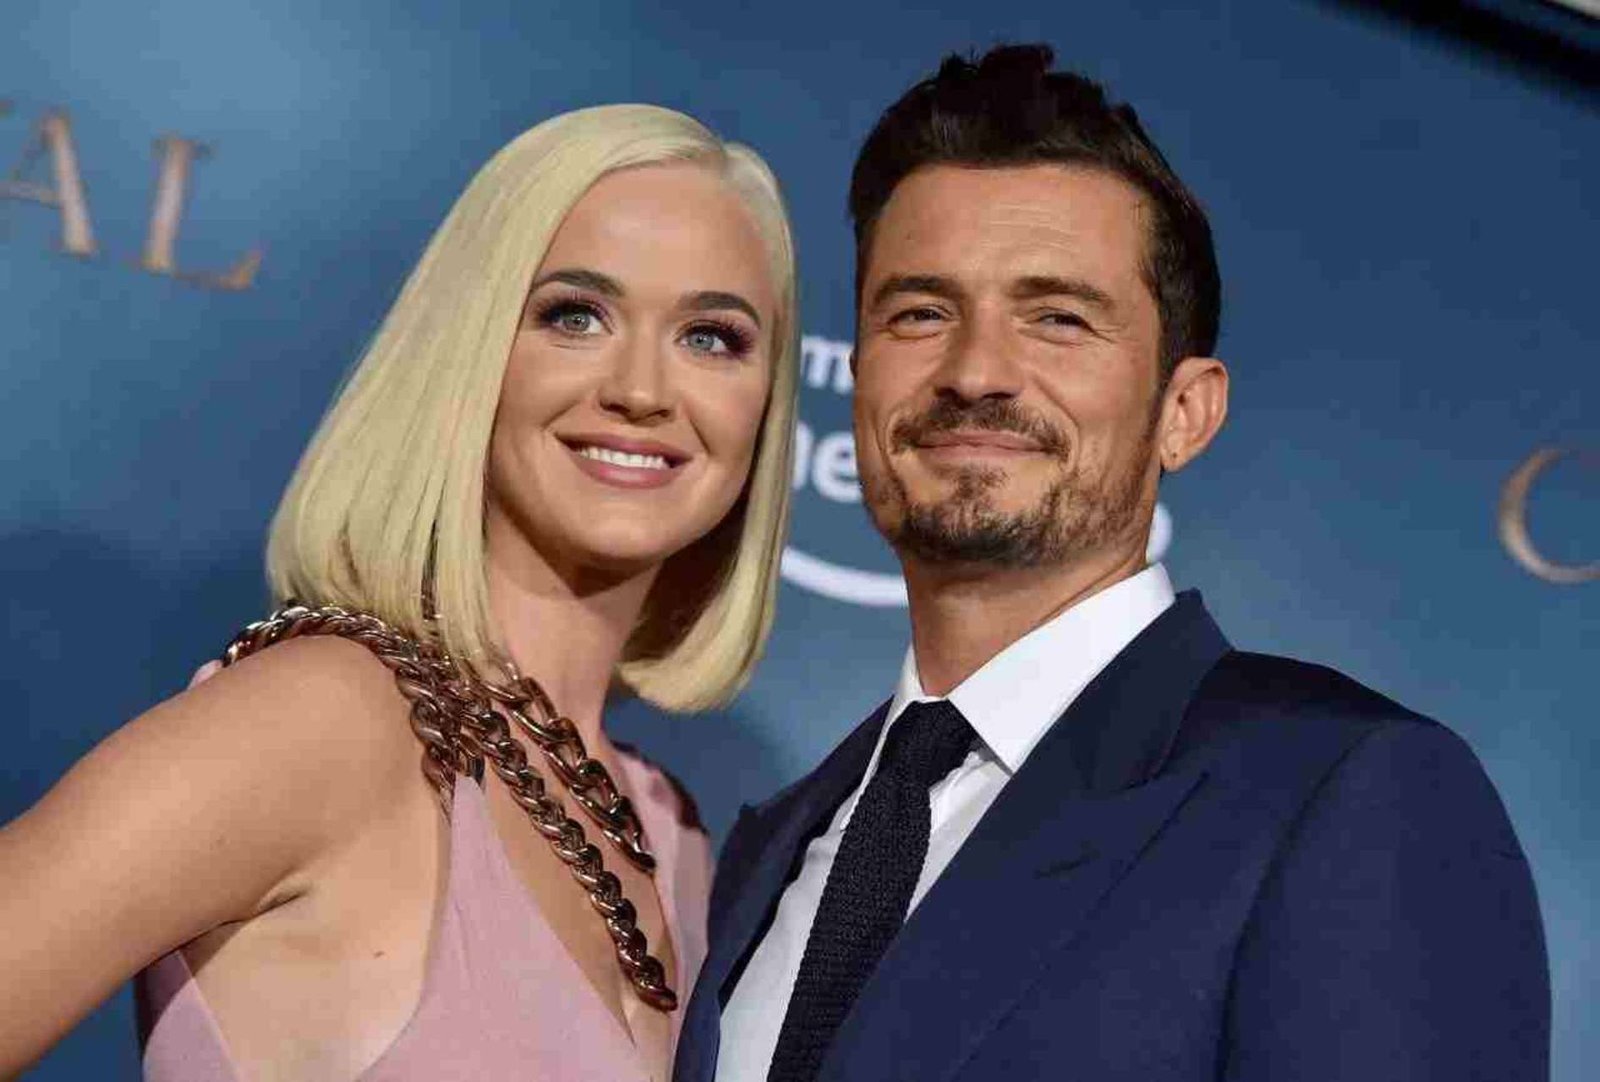 Orlando Bloom and Katy Perry’s Relationship Status Sparks Speculation Amidst Recent Events